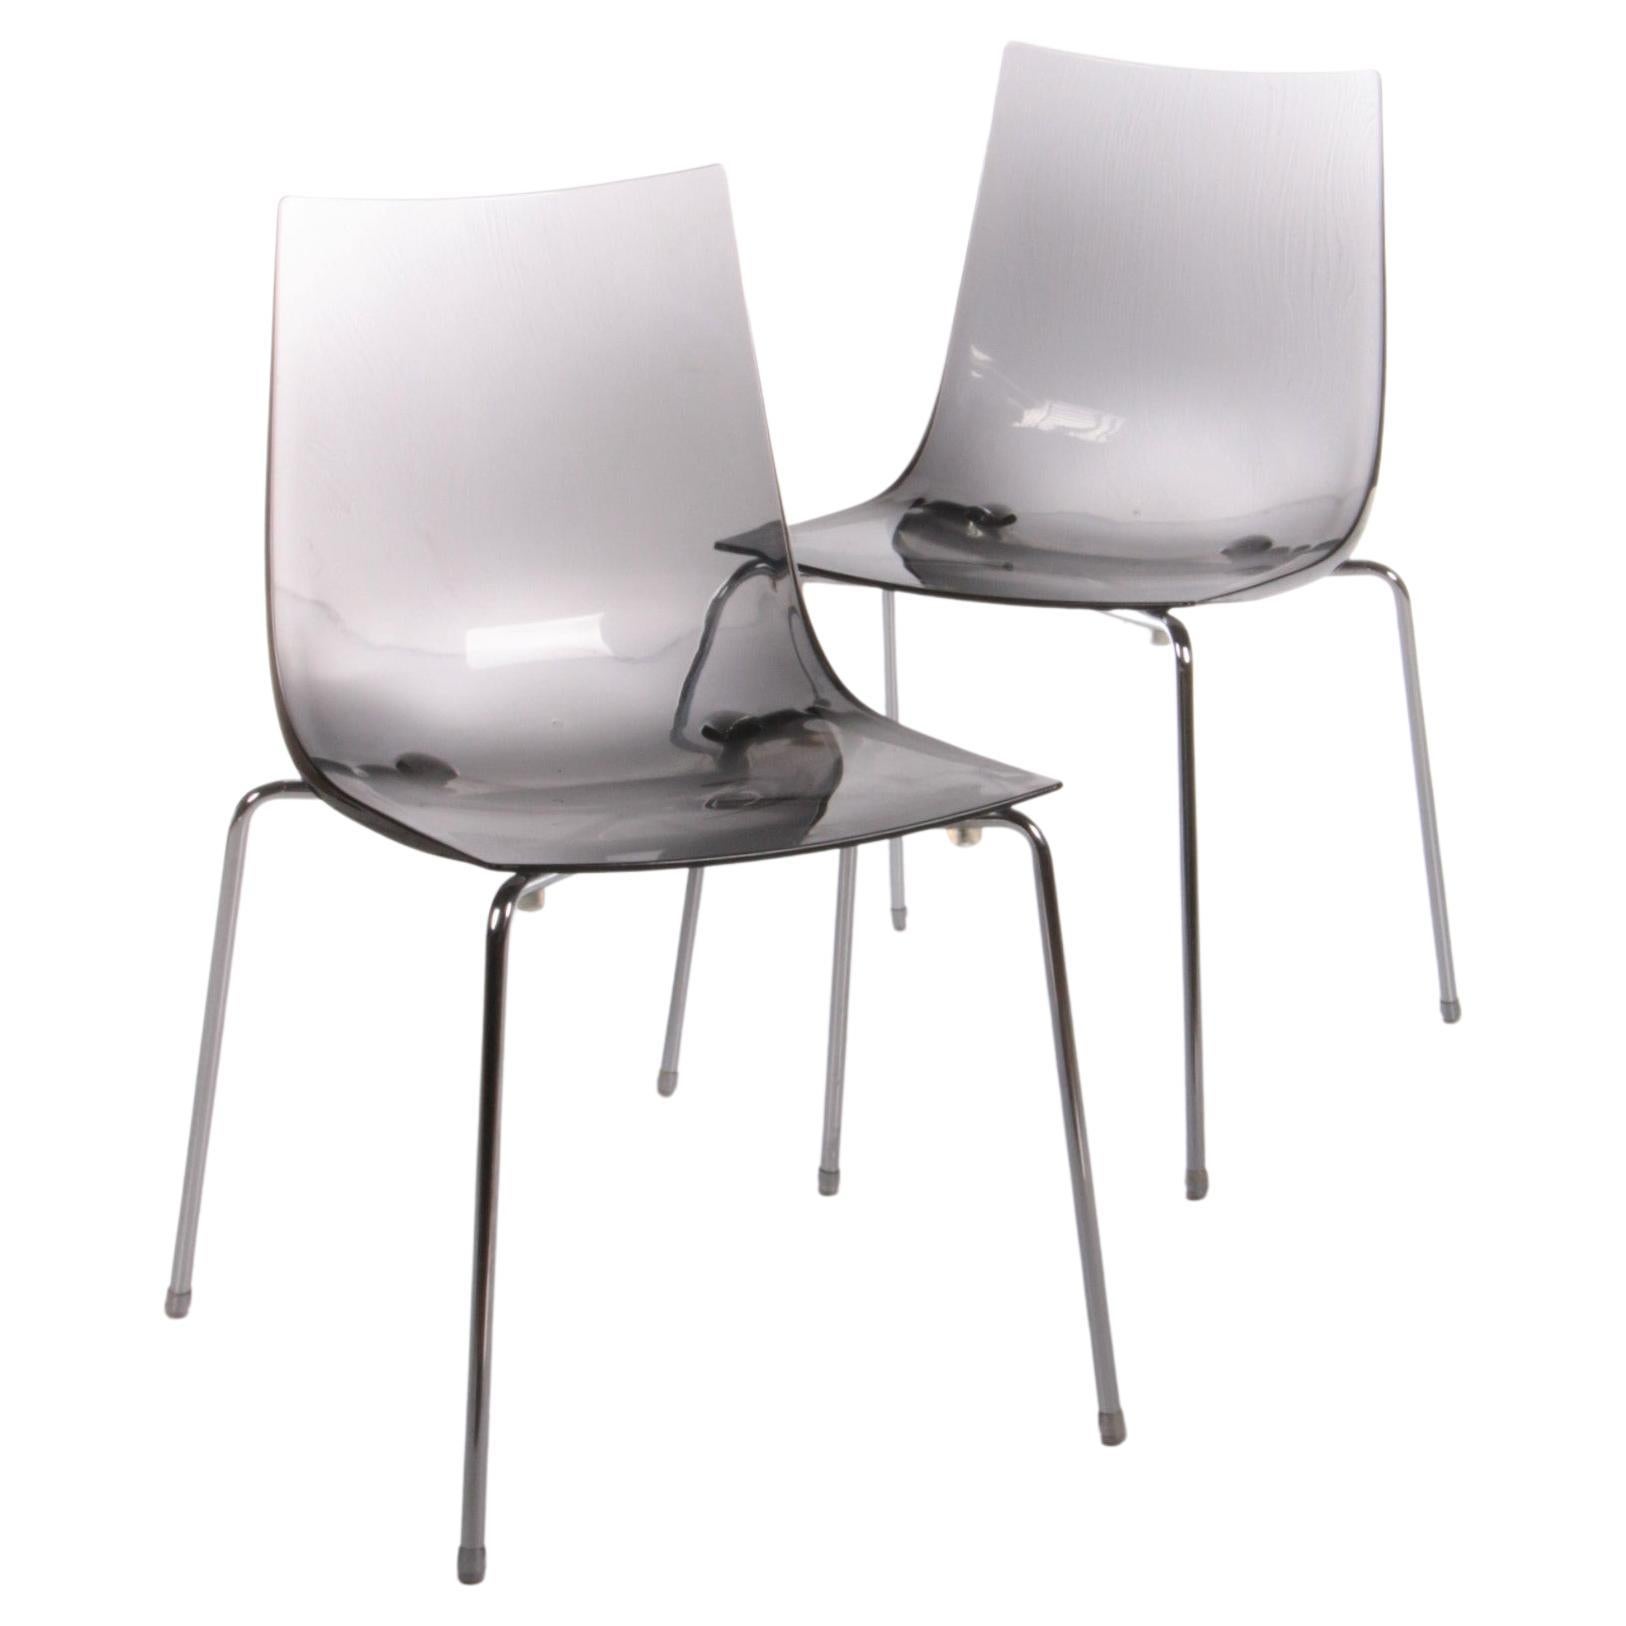 Set of Two Italian Dining Room Chairs by Roberto Foschia, 2007 at 1stDibs